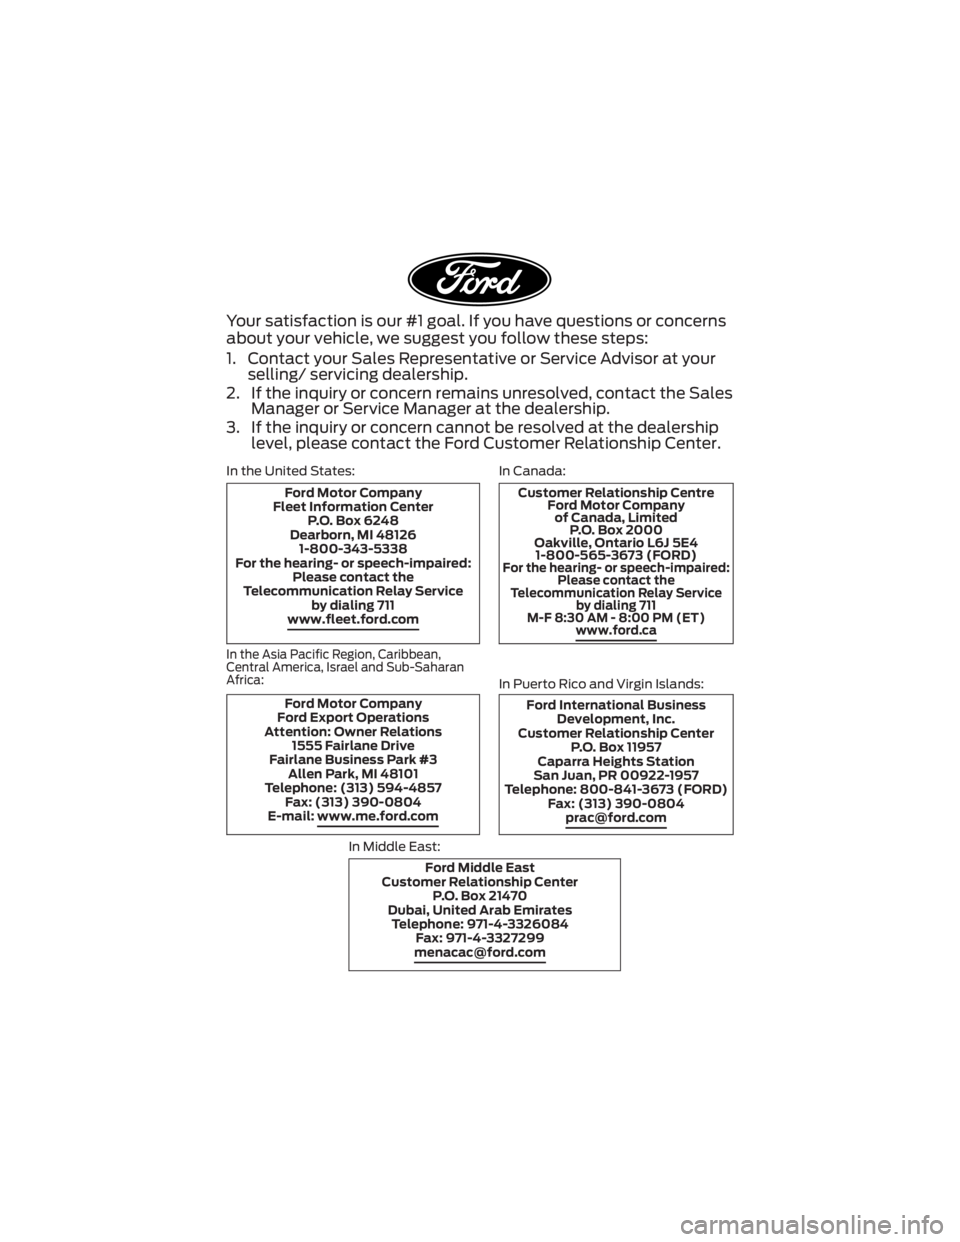 FORD F-600 2022  Warranty Guide Your satisfaction is our #1 goal. If you have questions or concerns
about your vehicle, we suggest you follow these steps:
1. Contact your Sales Representative or Service Advisor at yourselling/ servi